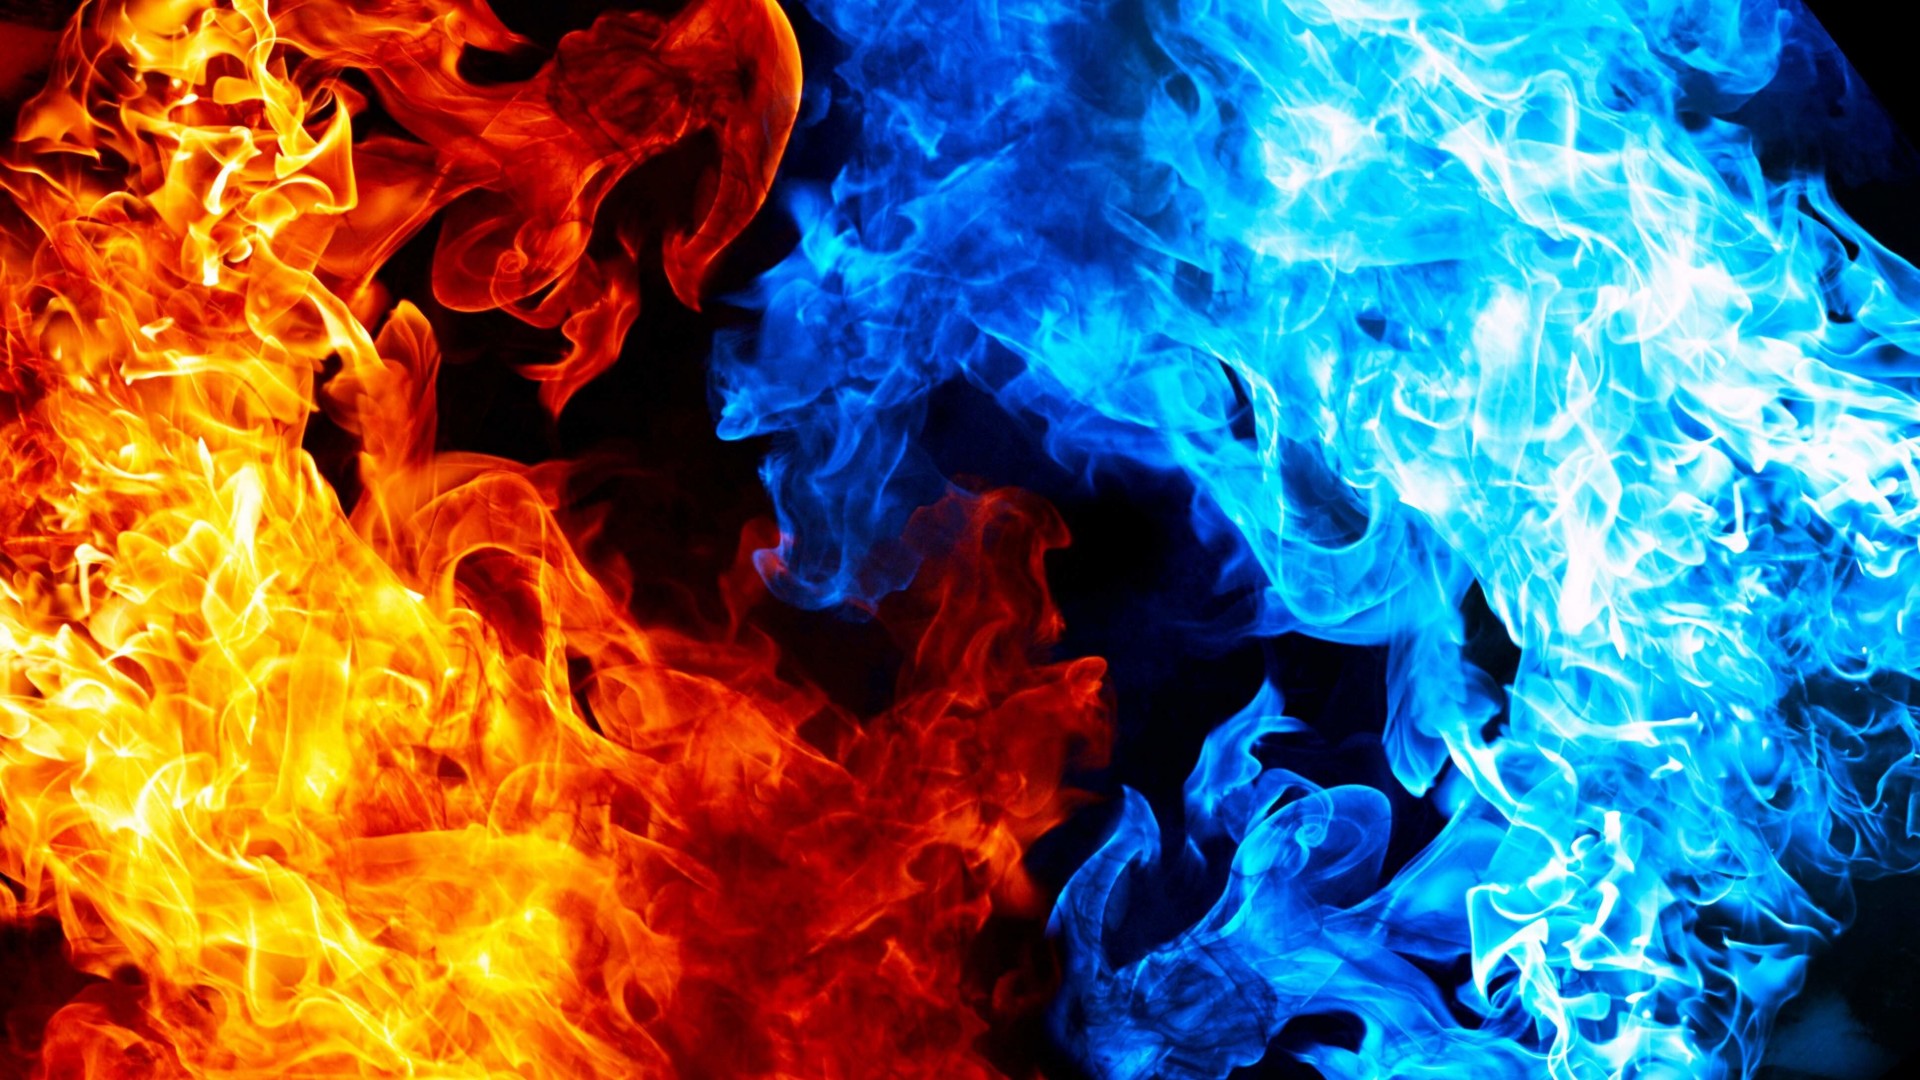 Blue And Red Fire Wallpaper for Desktop 1920x1080